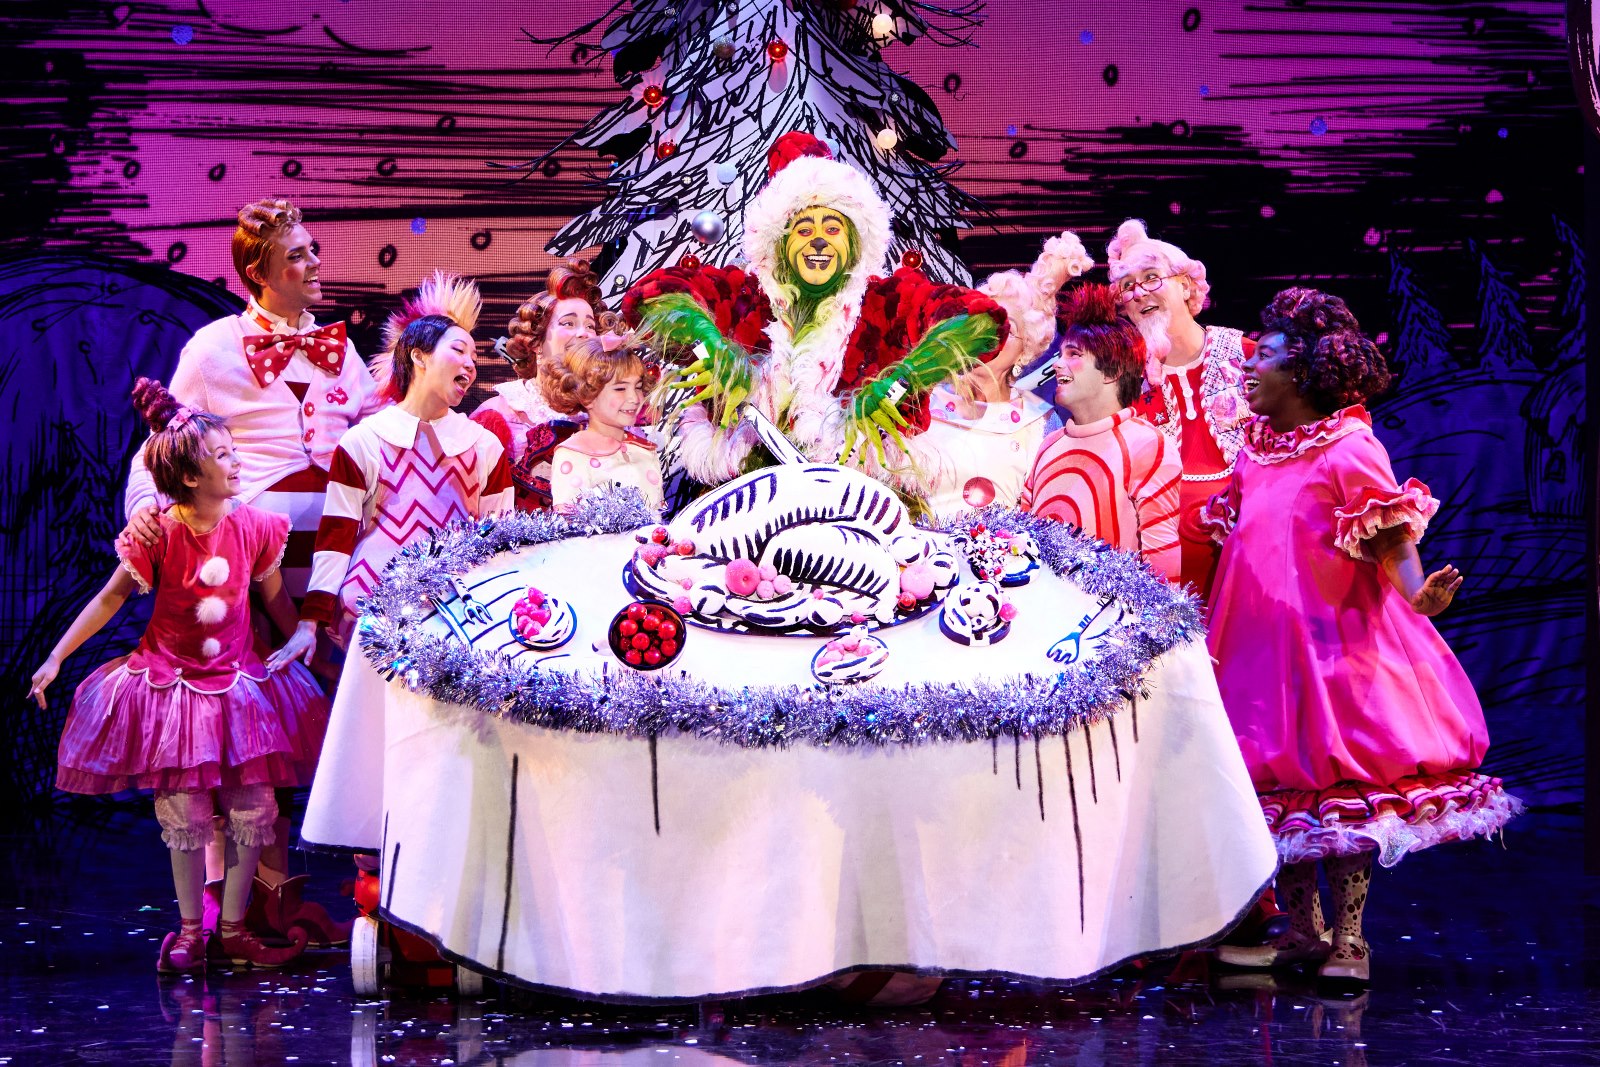 The cast of "Dr. Seuss' How the Grinch Stole Christmas! The Musical" performs a scene on stage.